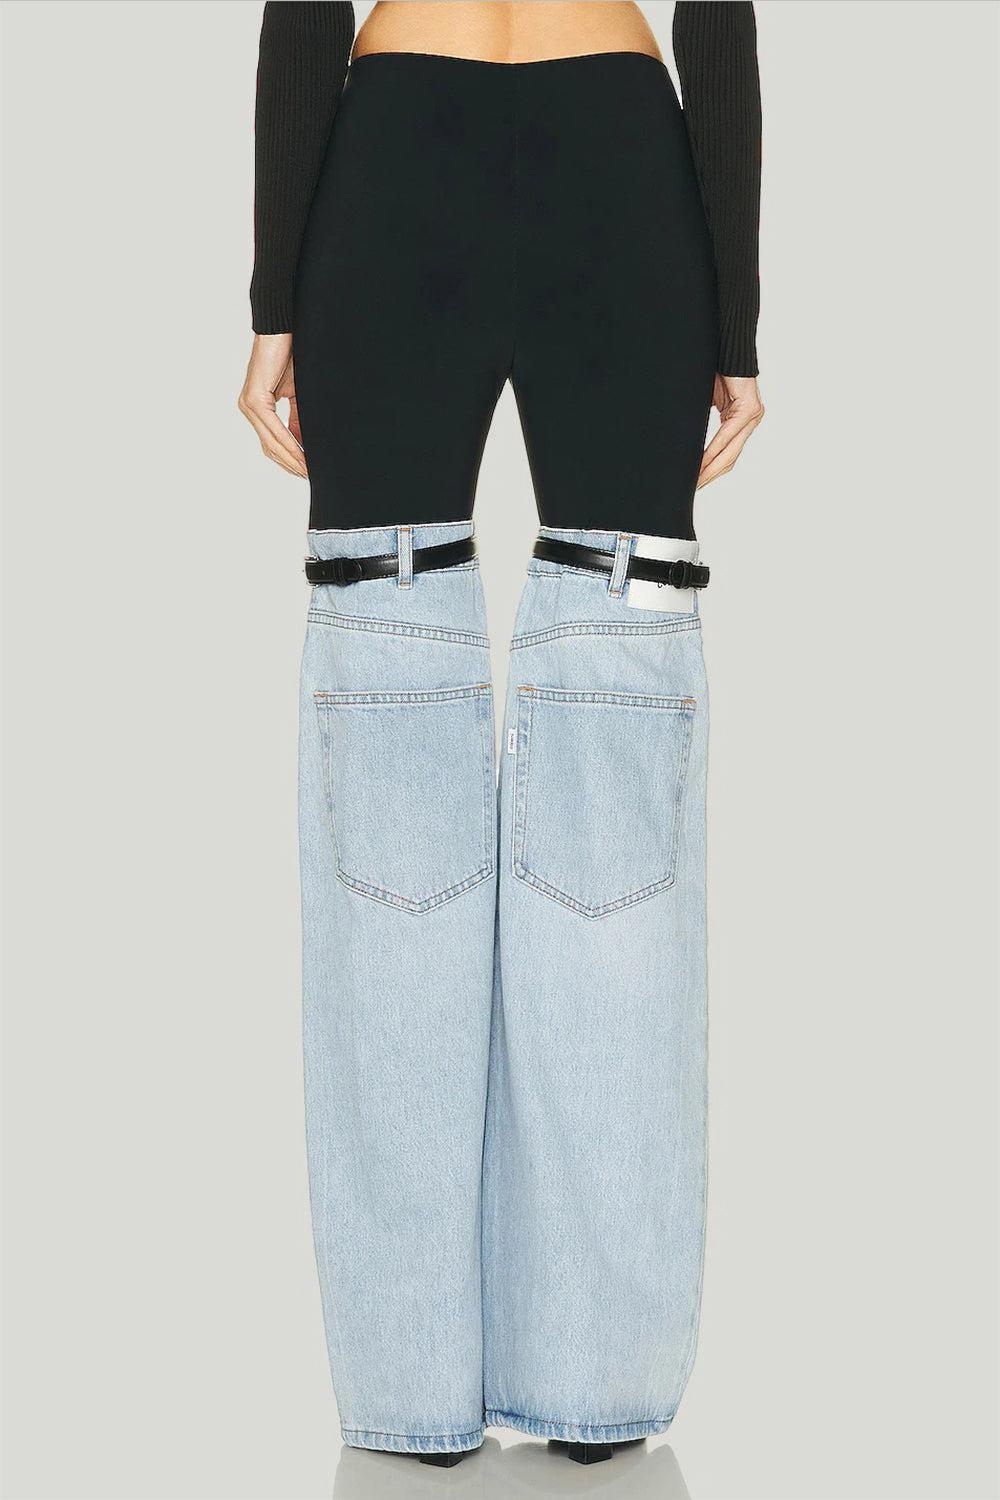 the back of a woman's jeans with a belt